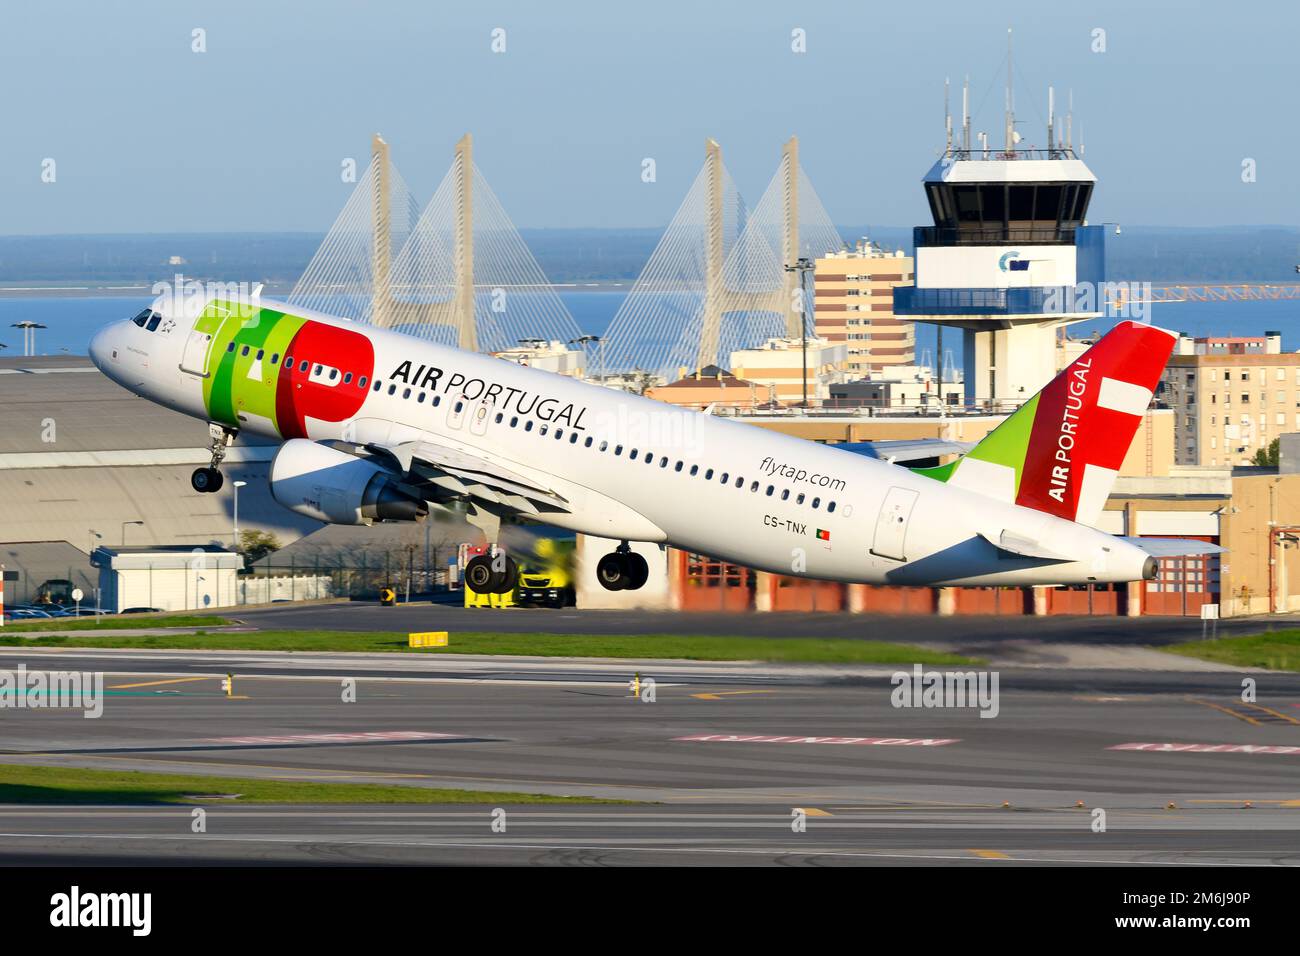 TAP Air Portugal Airbus A320 aircraft taking off from Lisbon Airport with Vasco da Gama Bridge behind. Airplane of TAP and Lisbon ATC tower. Stock Photo